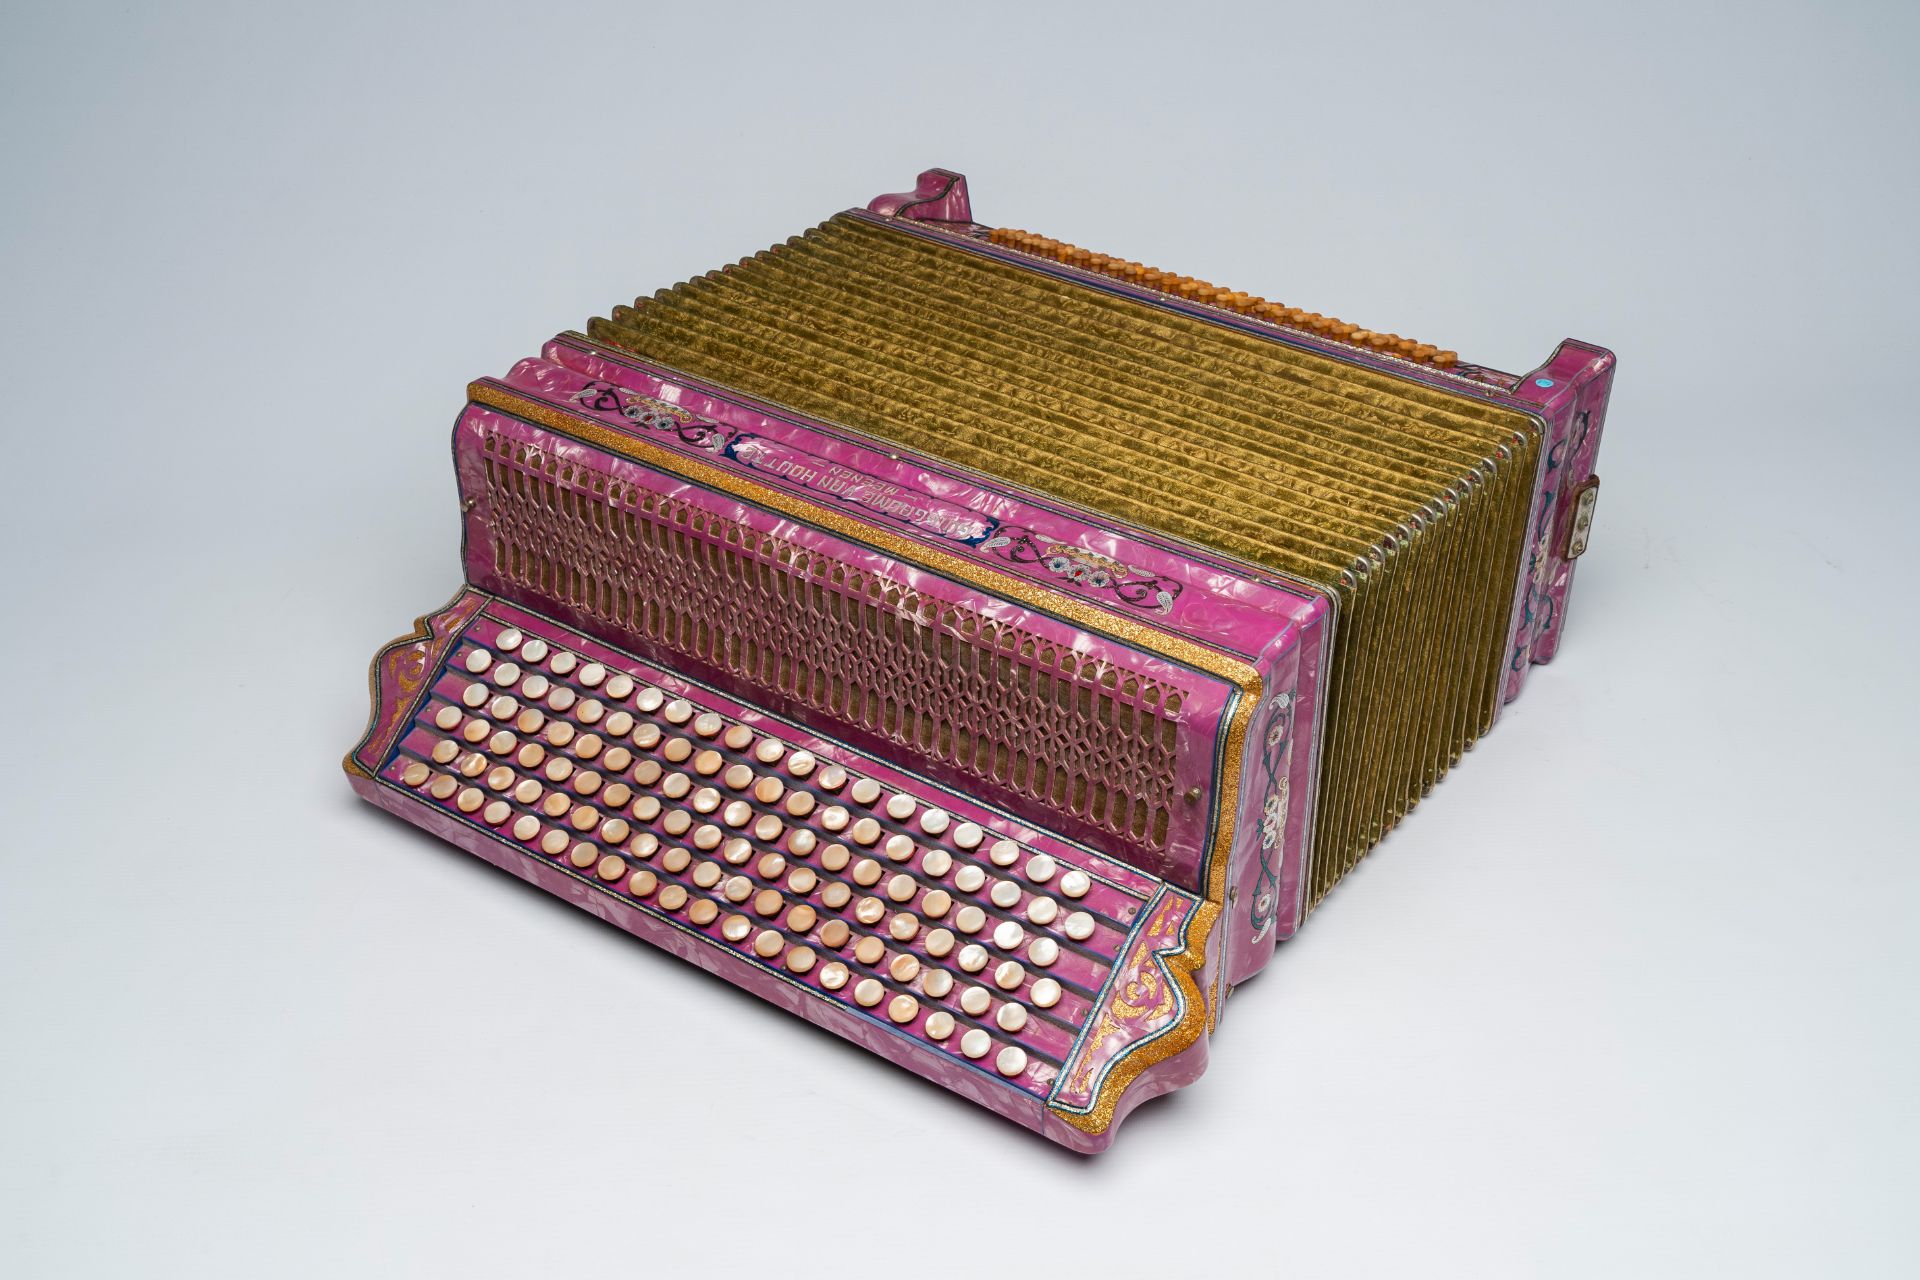 A Belgian 'Guillaume Van Houtte' chromatic accordion with button keyboard, ca. 1930 - Image 5 of 6